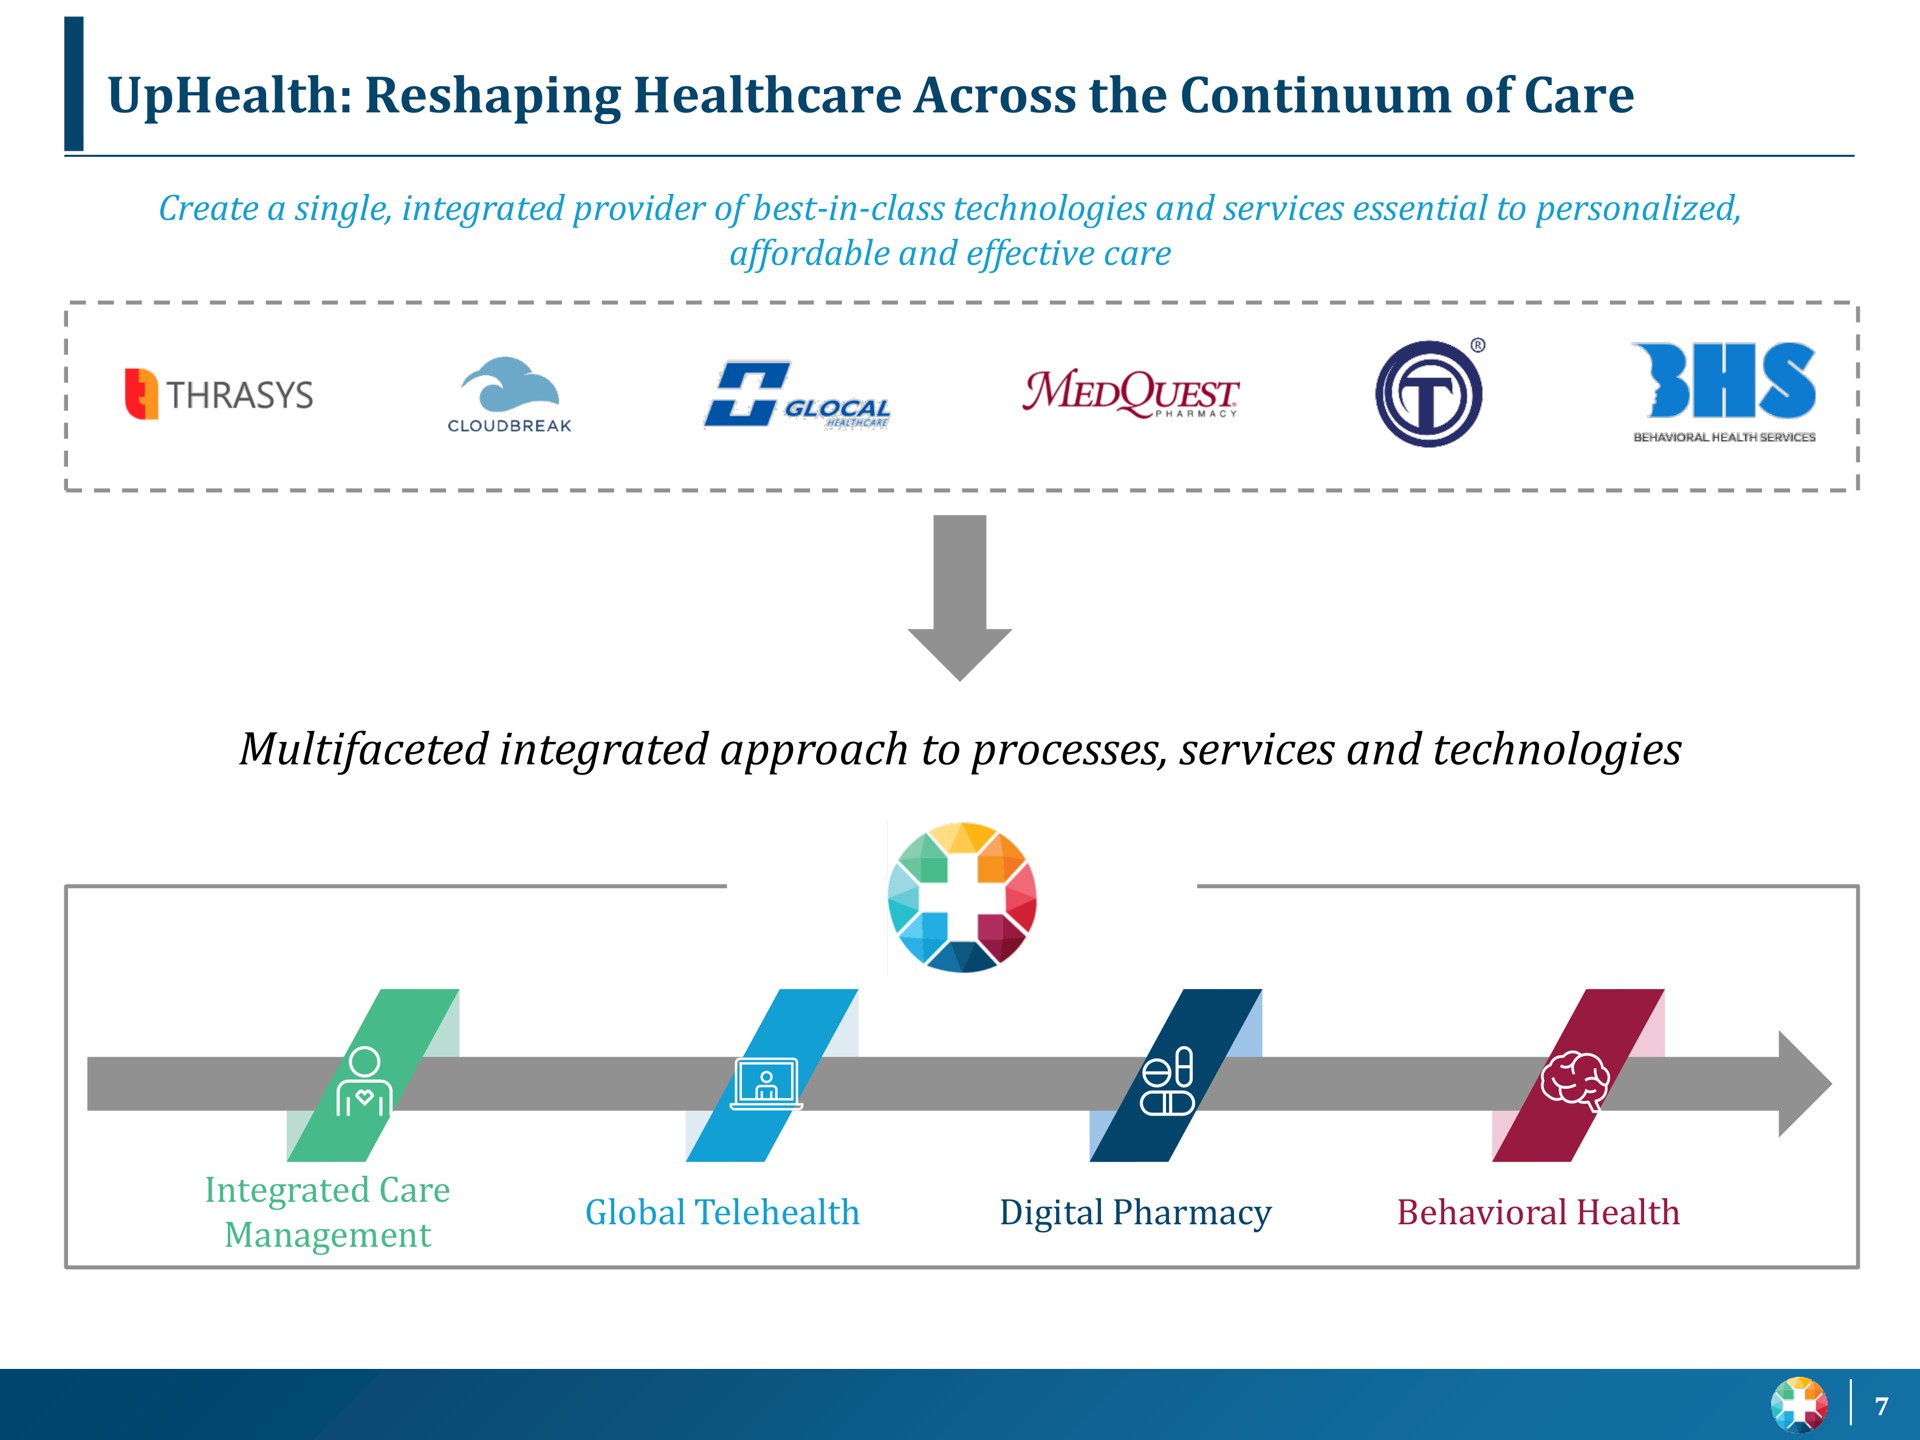 reshaping across the continuum of care multifaceted integrated approach to processes services and technologies a pea | UpHealth